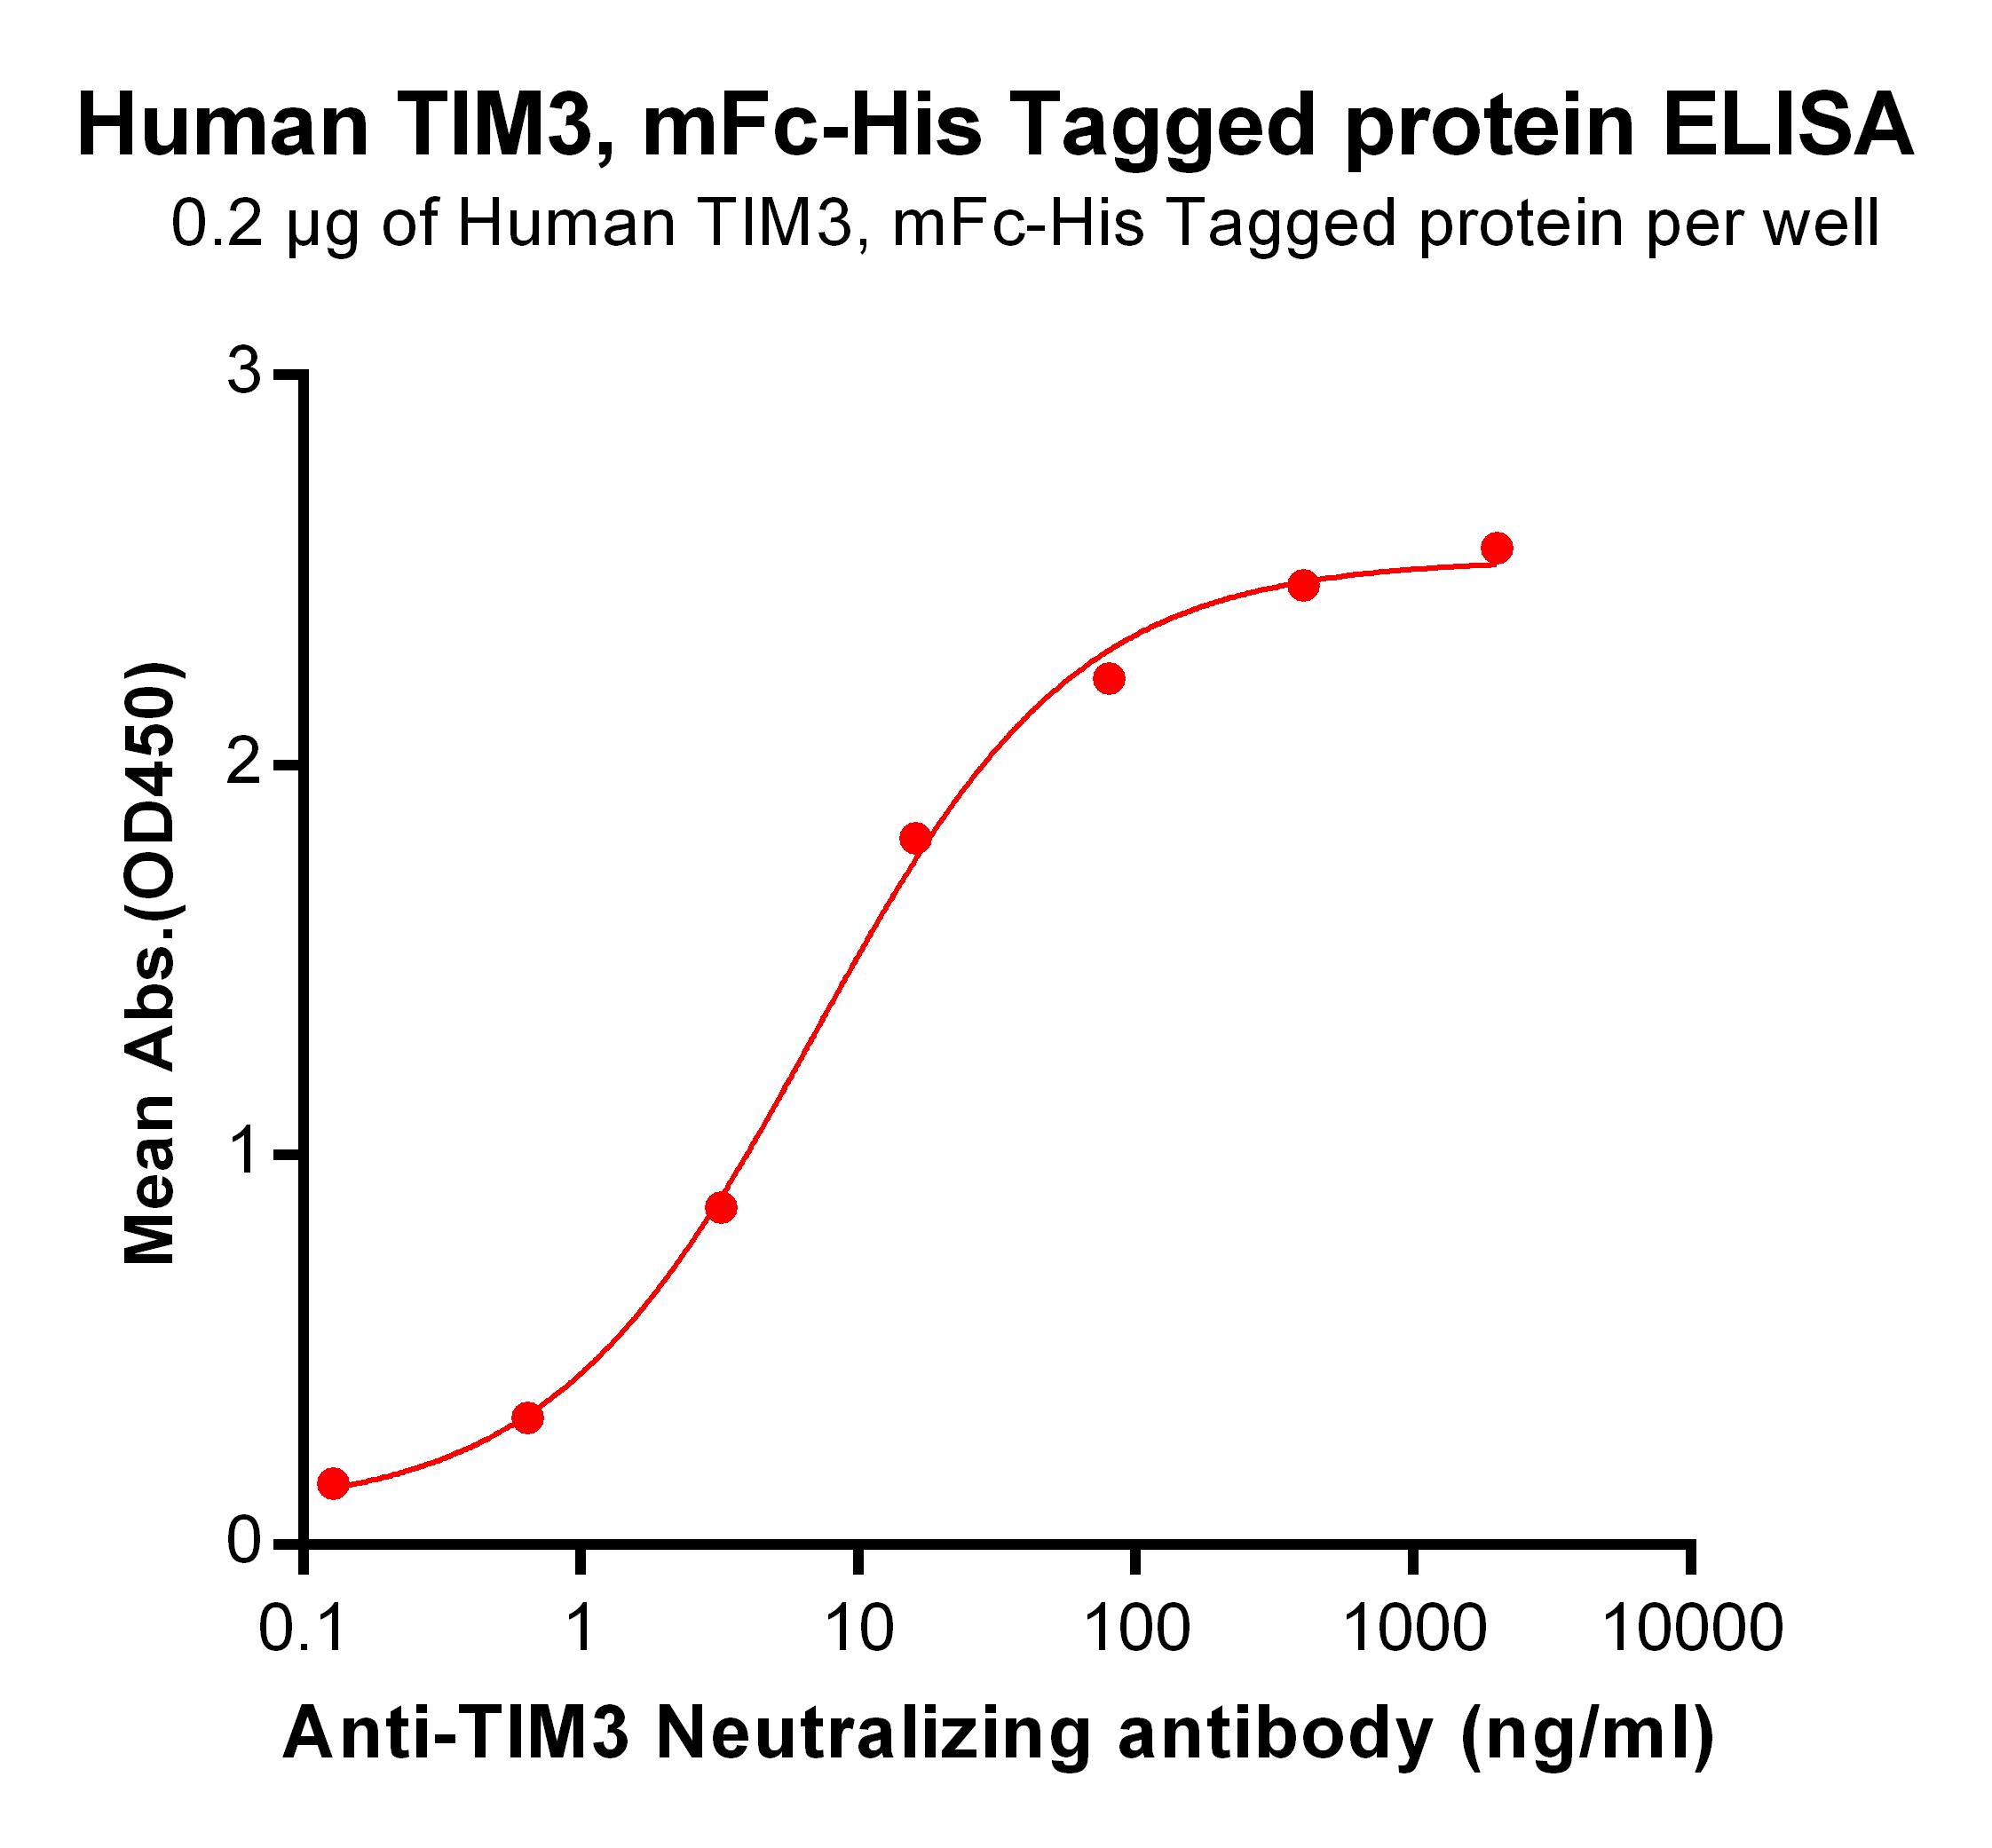 Figure 2. ELISA plate pre-coated by 2 µg/ml (100 µl/well) Human TIM3, mFc-His tagged protein  can bind Anti-TIM3 Neutralizing antibody  in a linear range of 0.64-80 ng/ml.